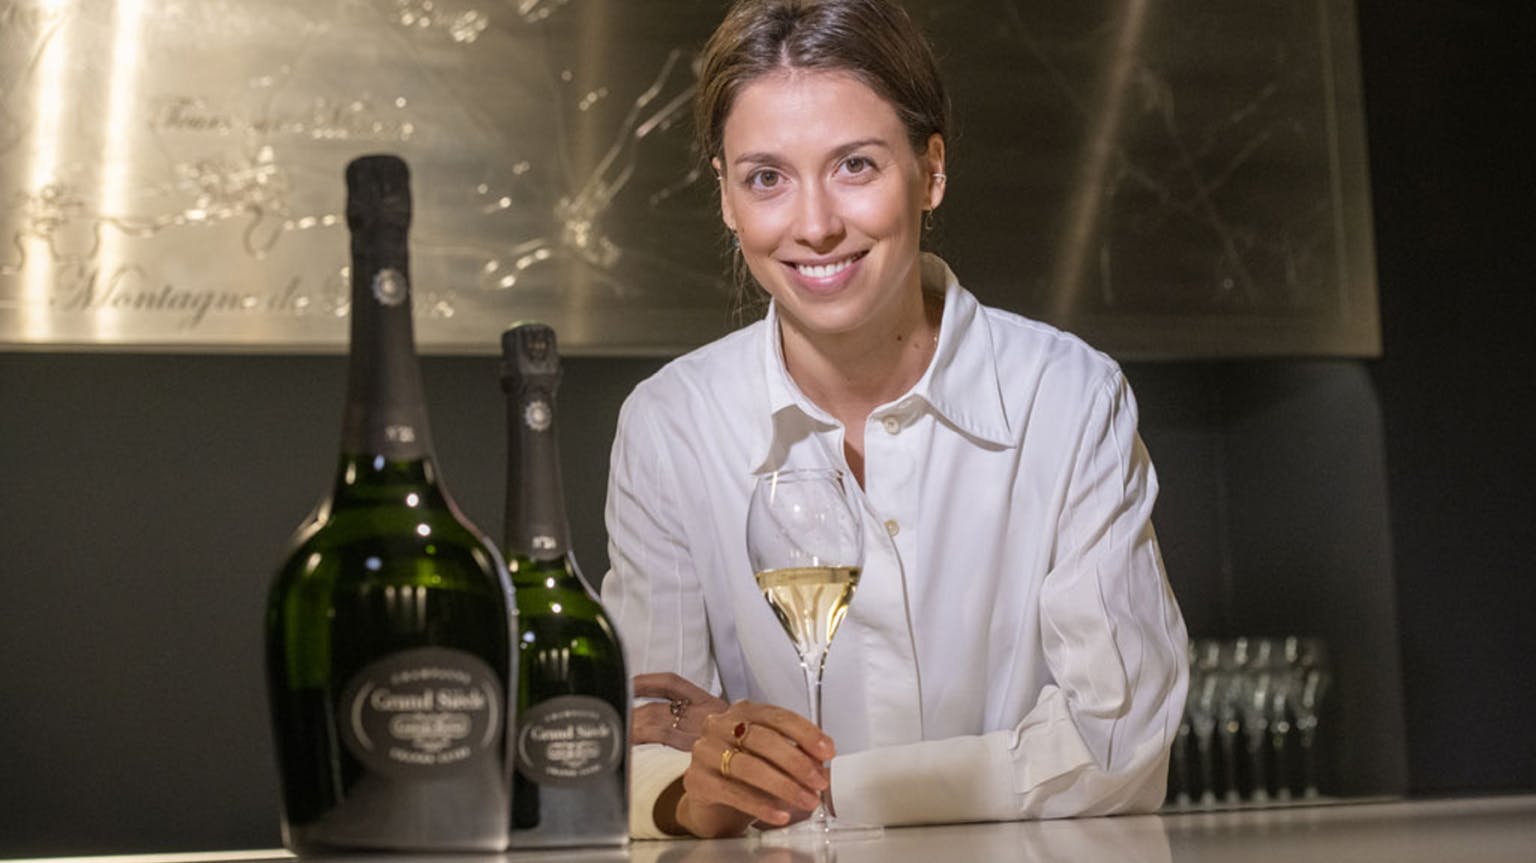 Laurent-Perrier Grand Siècle: recreating the perfect year